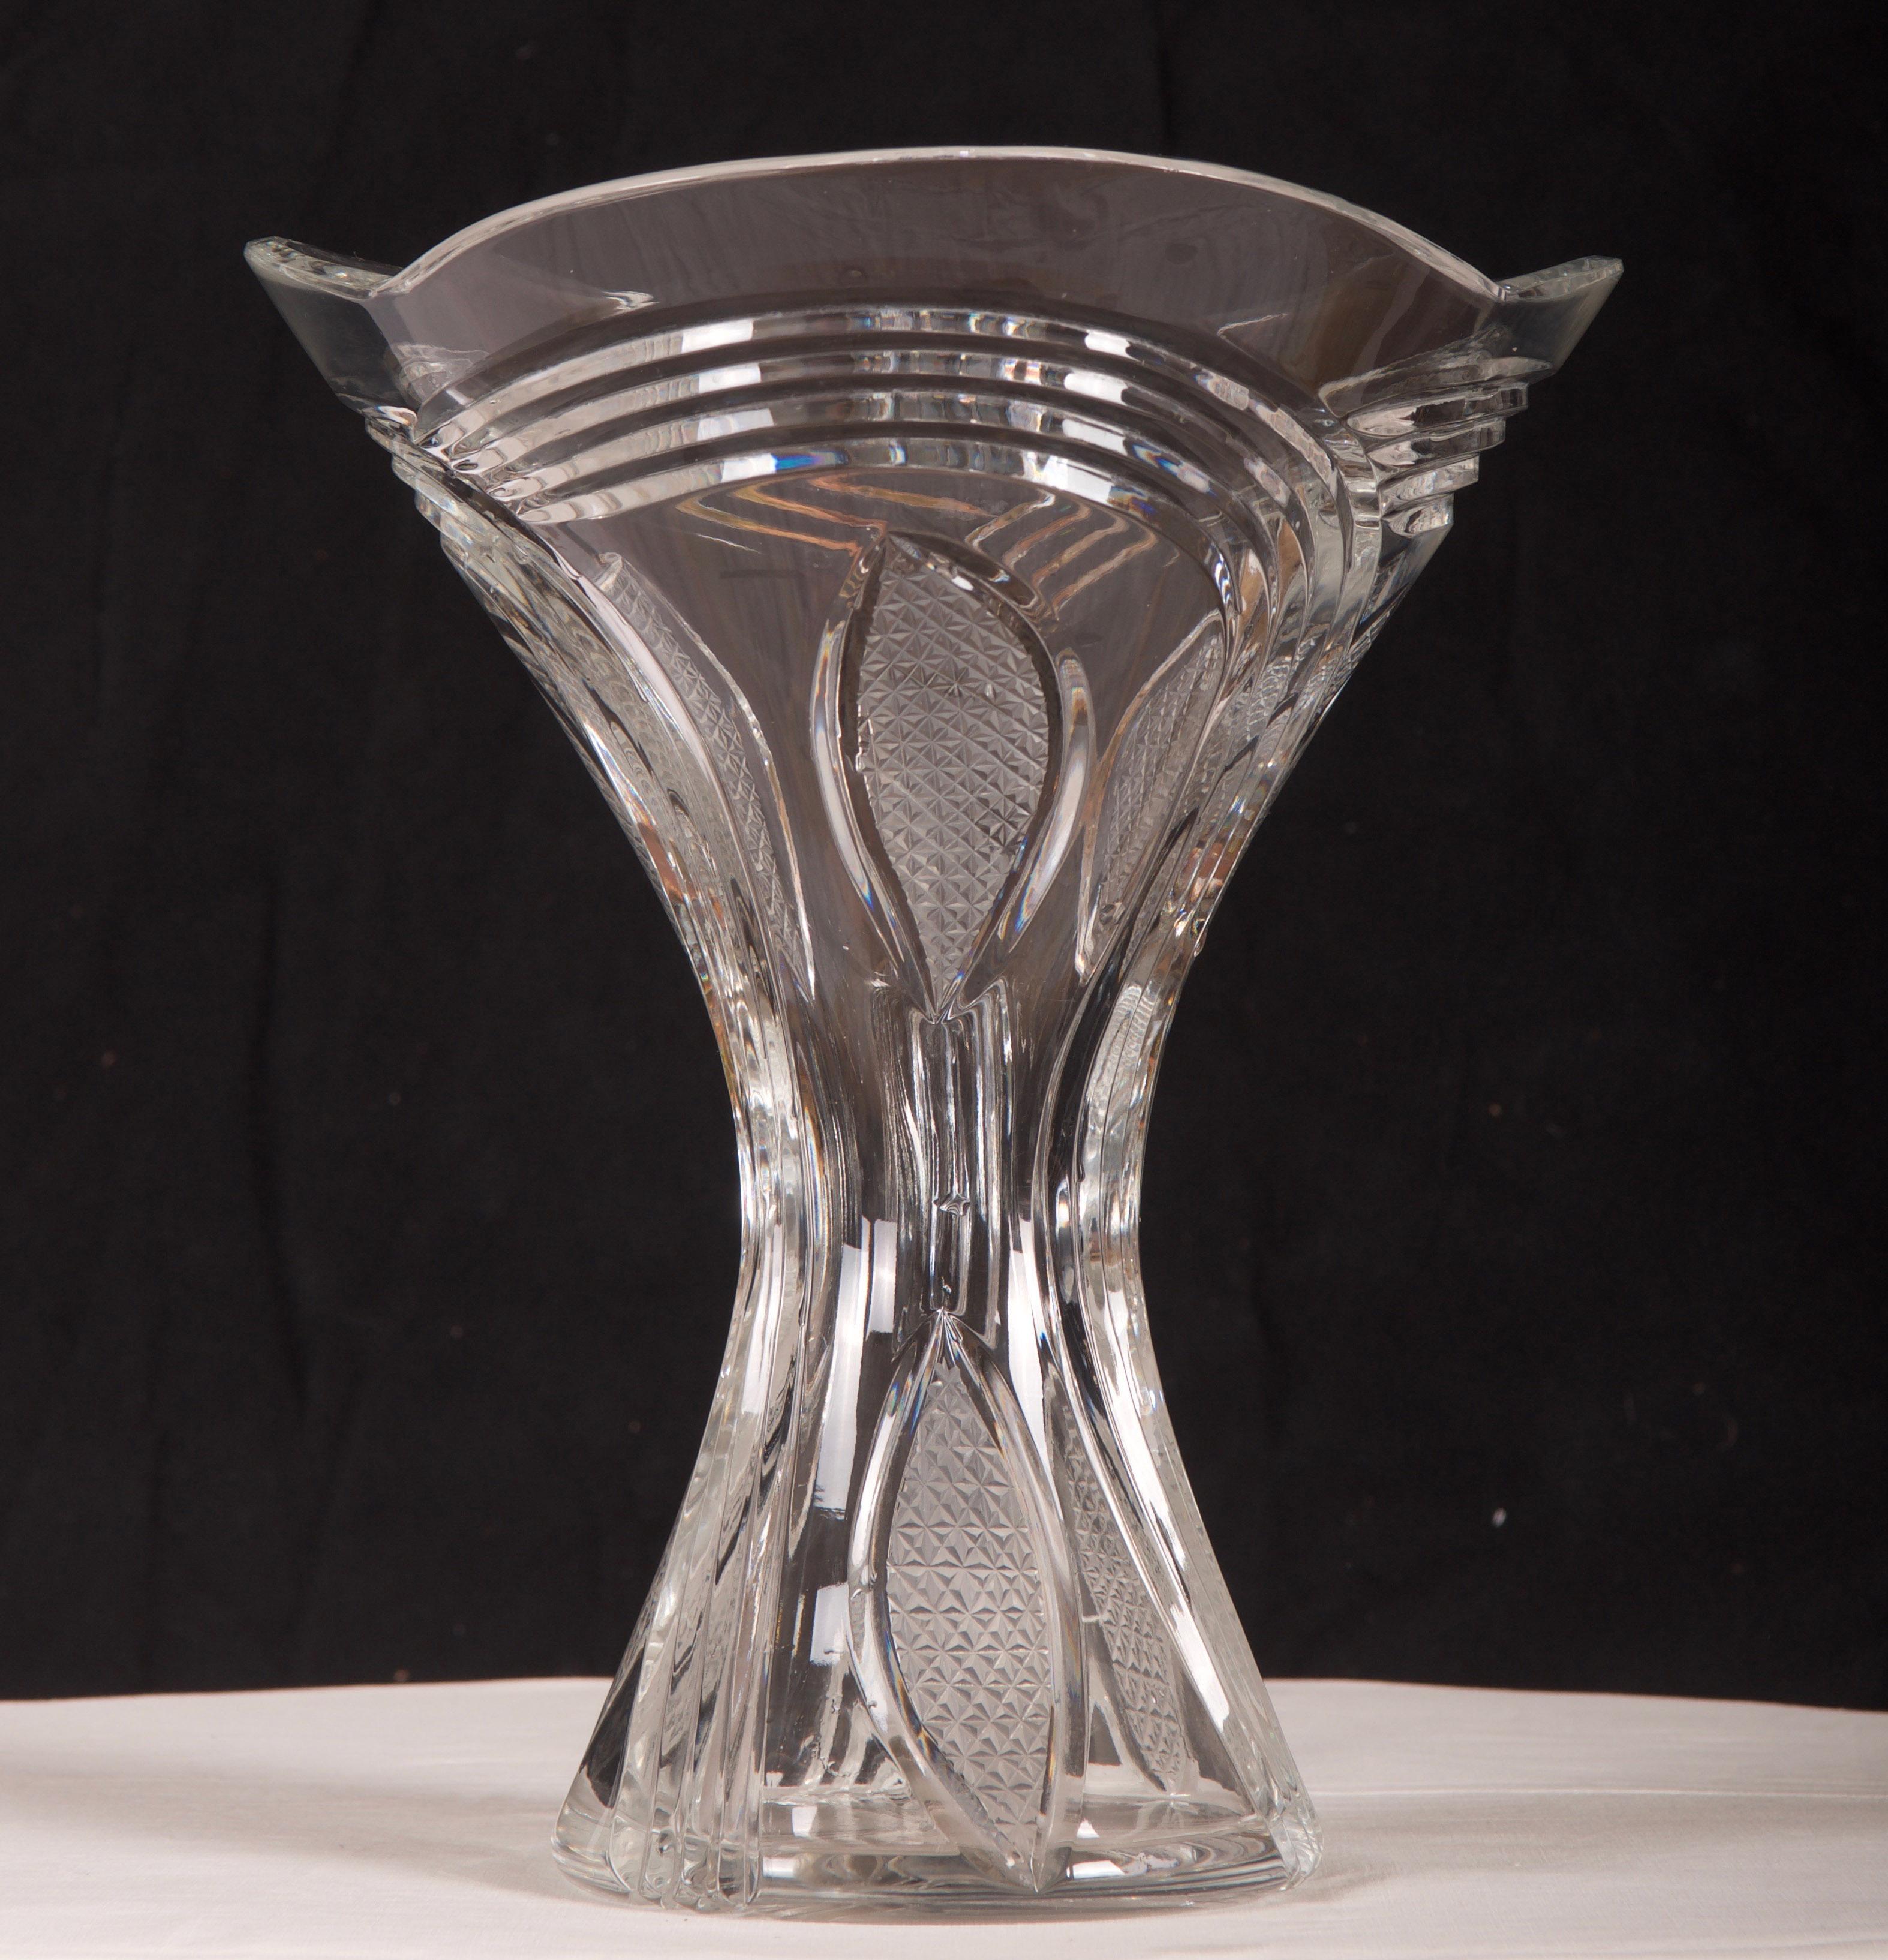 Polished crystal vase made circa the 1970s in one of the Bohemian glass works.